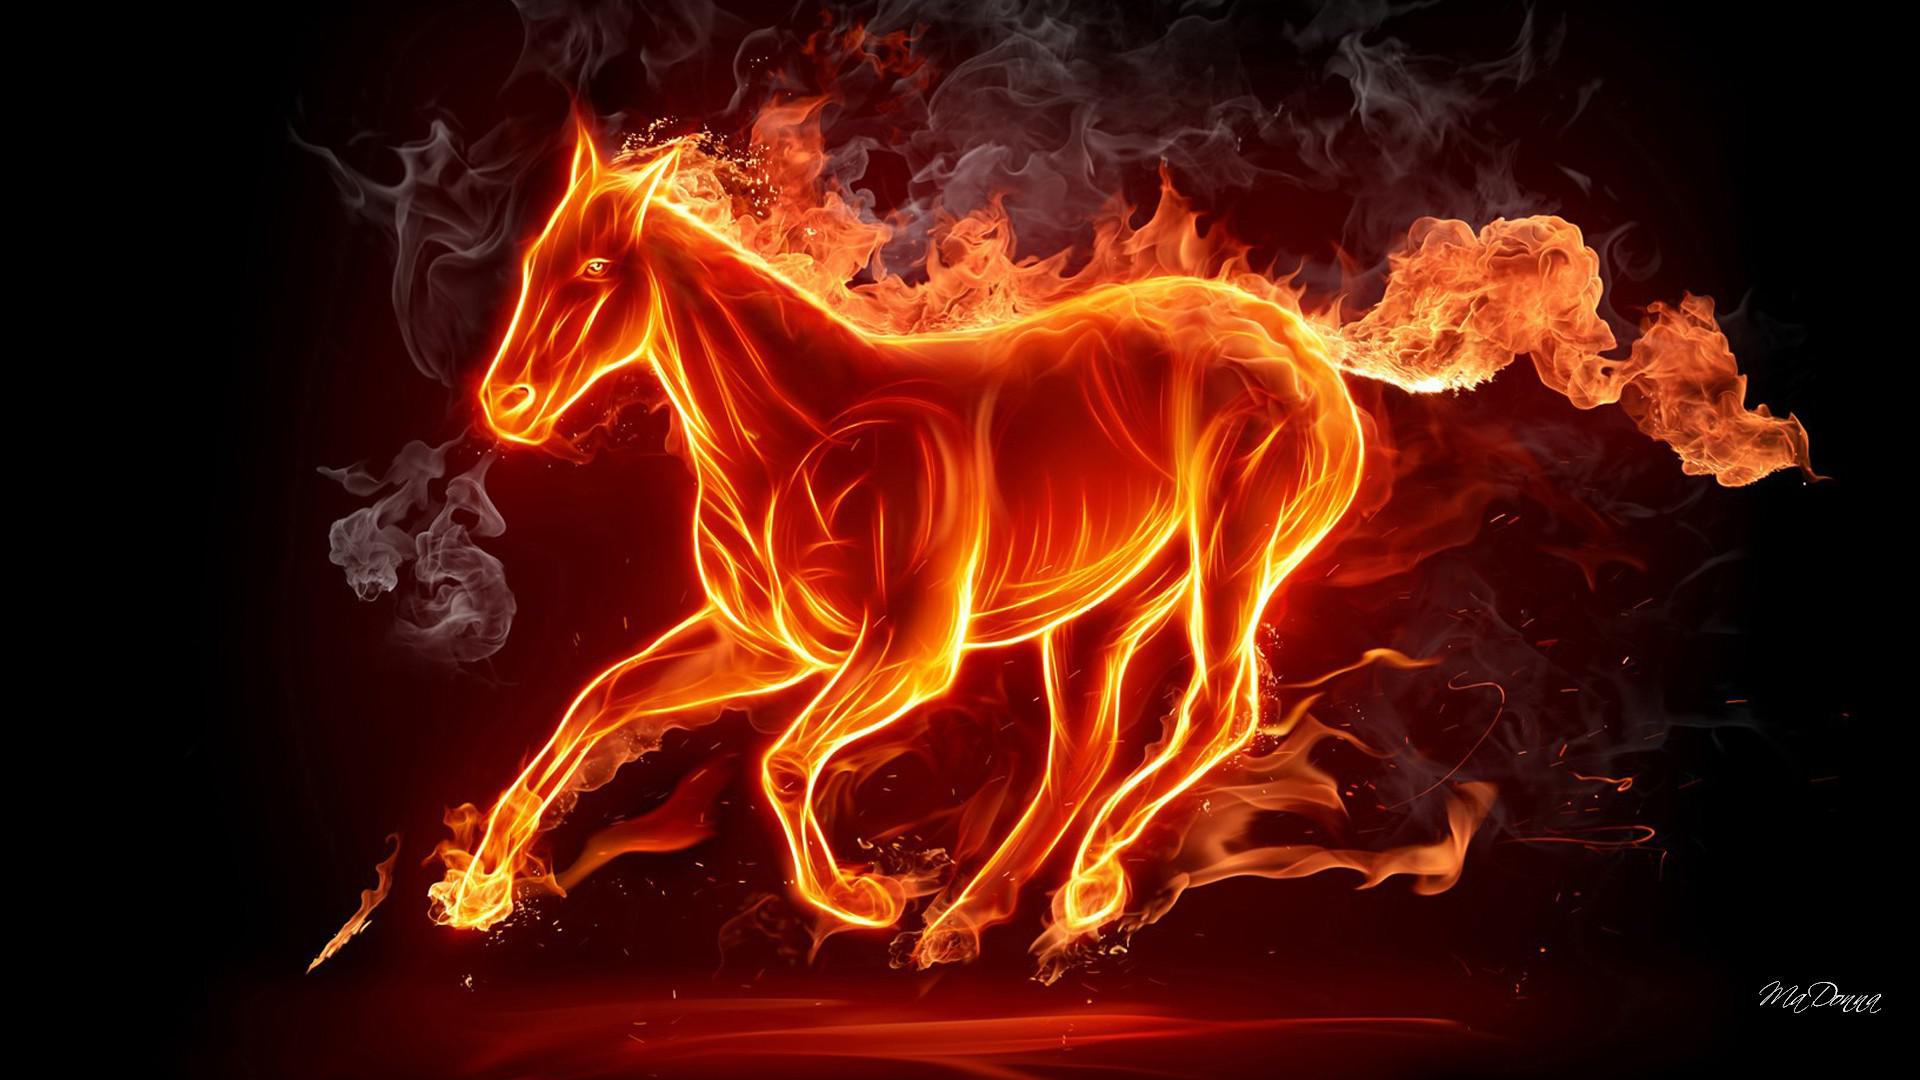 Flaming horse - - High Quality and Resolution Wallpapers